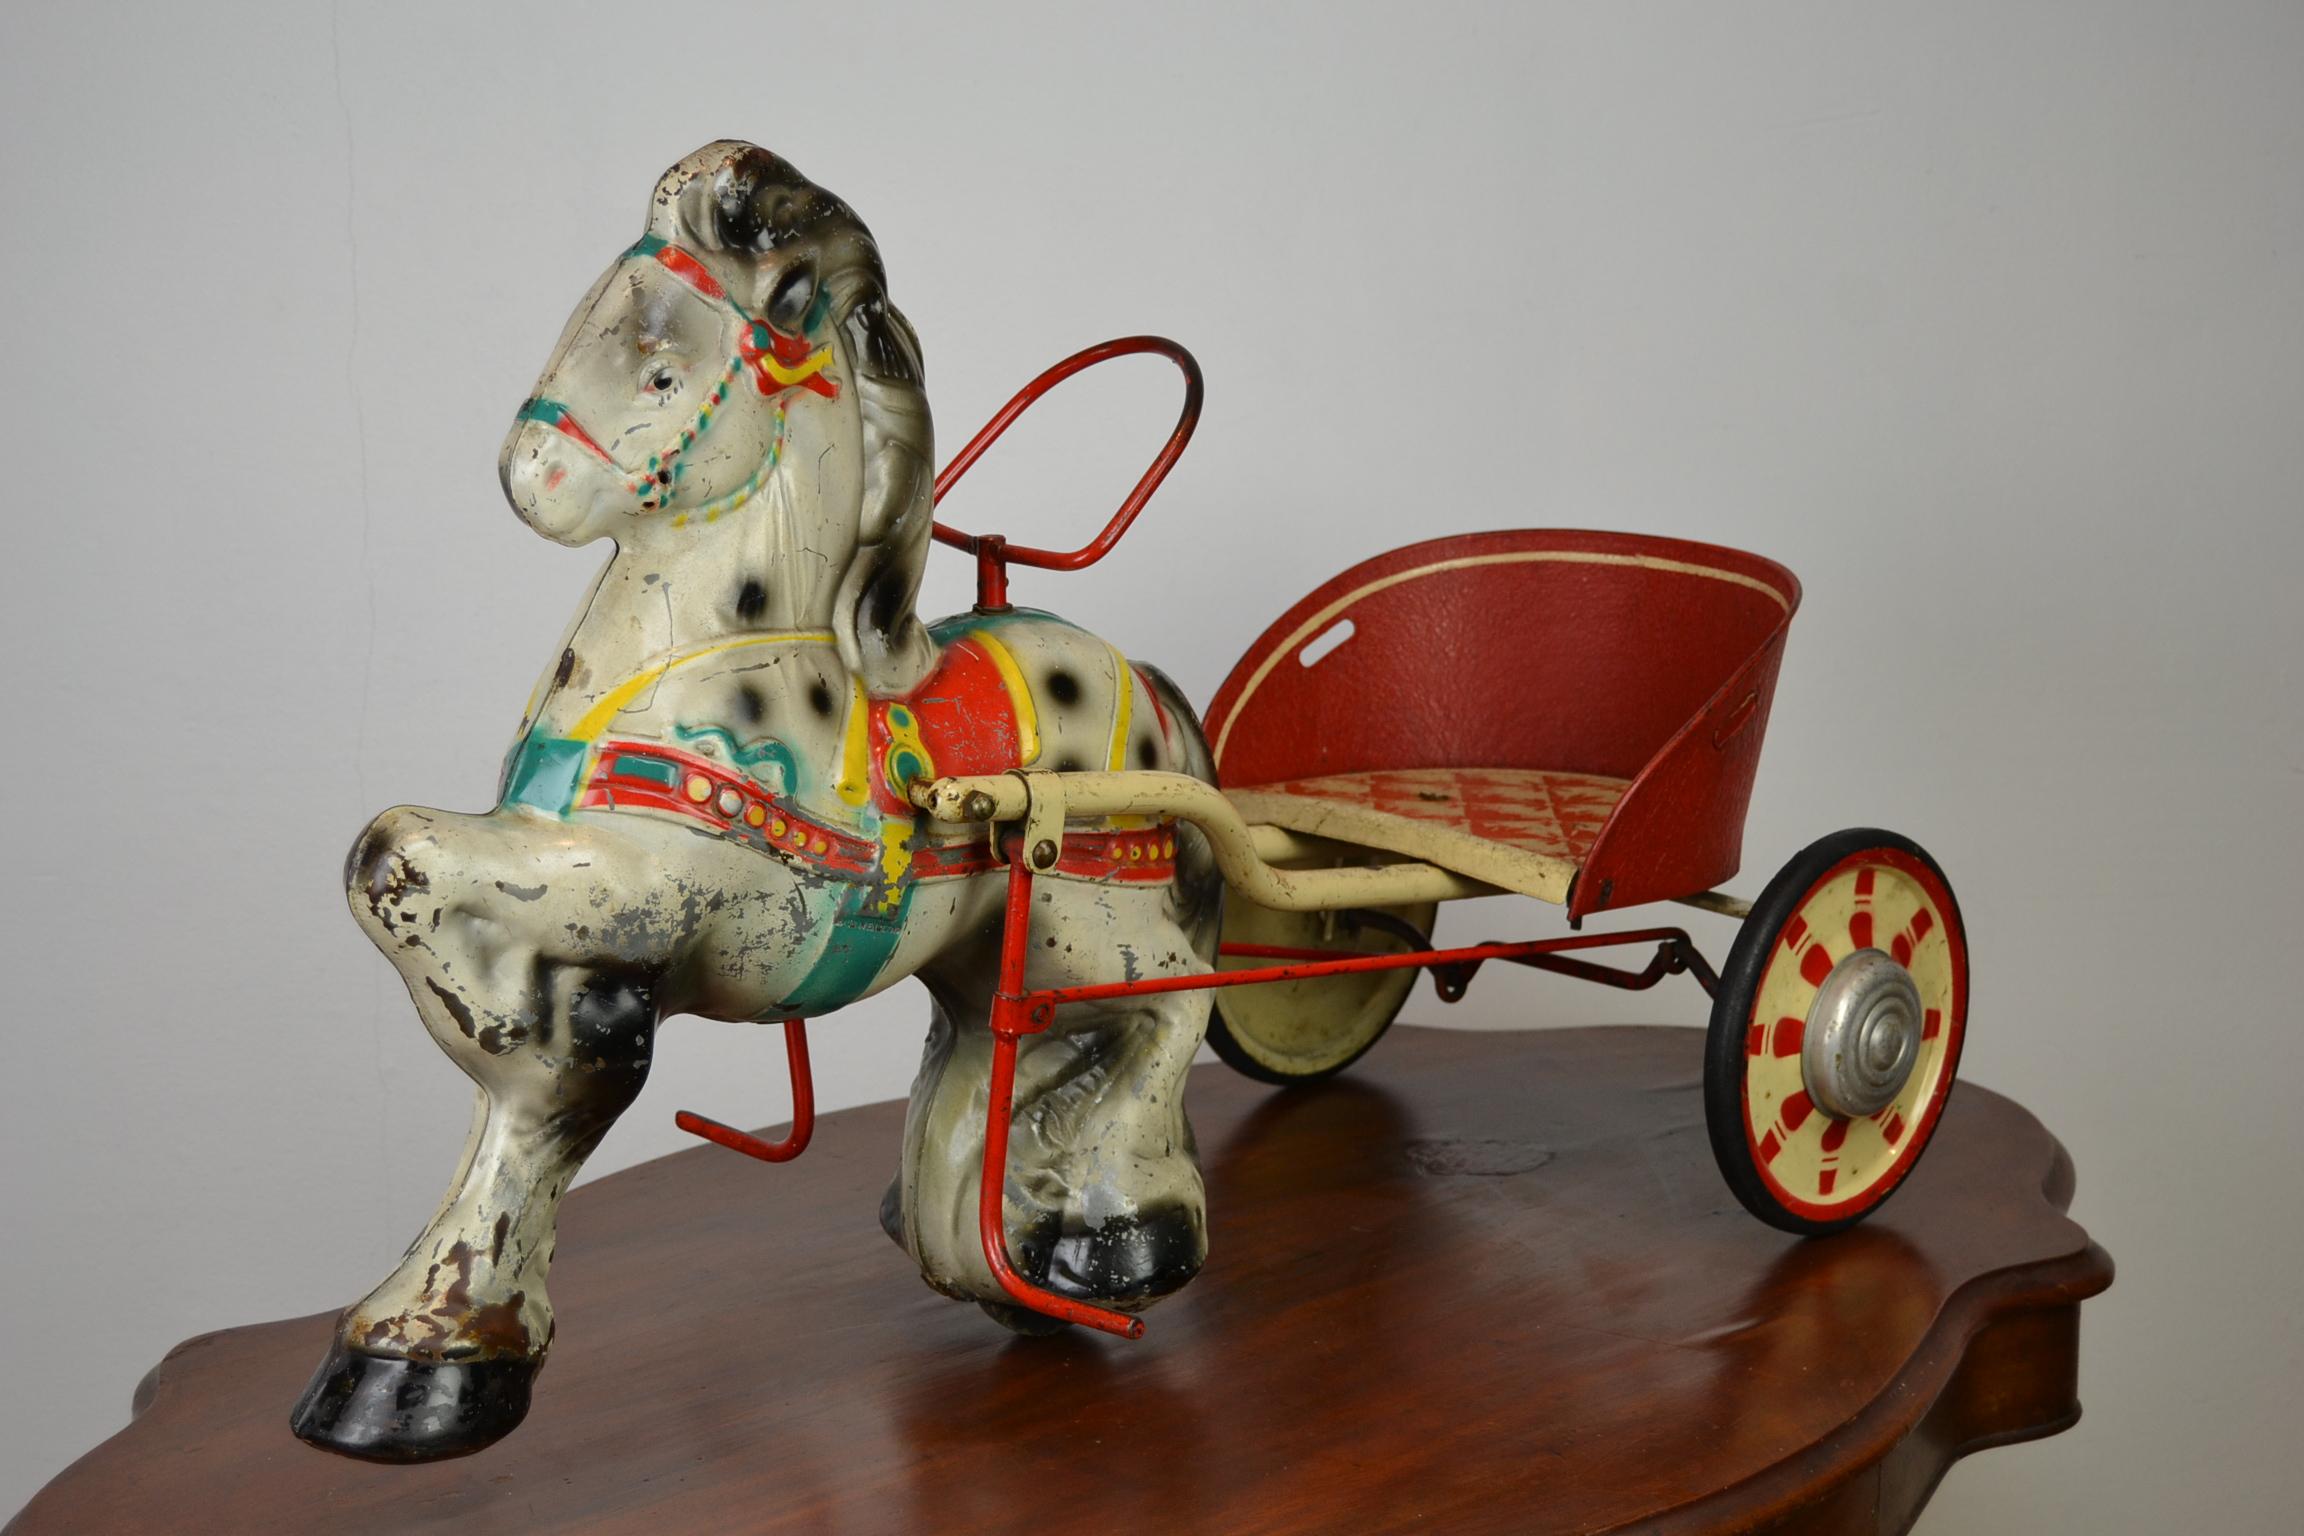 Metal 1950s Sebel Mobo Toys Pony Express Pedal Toy, Pressed Steel, U.K. For Sale